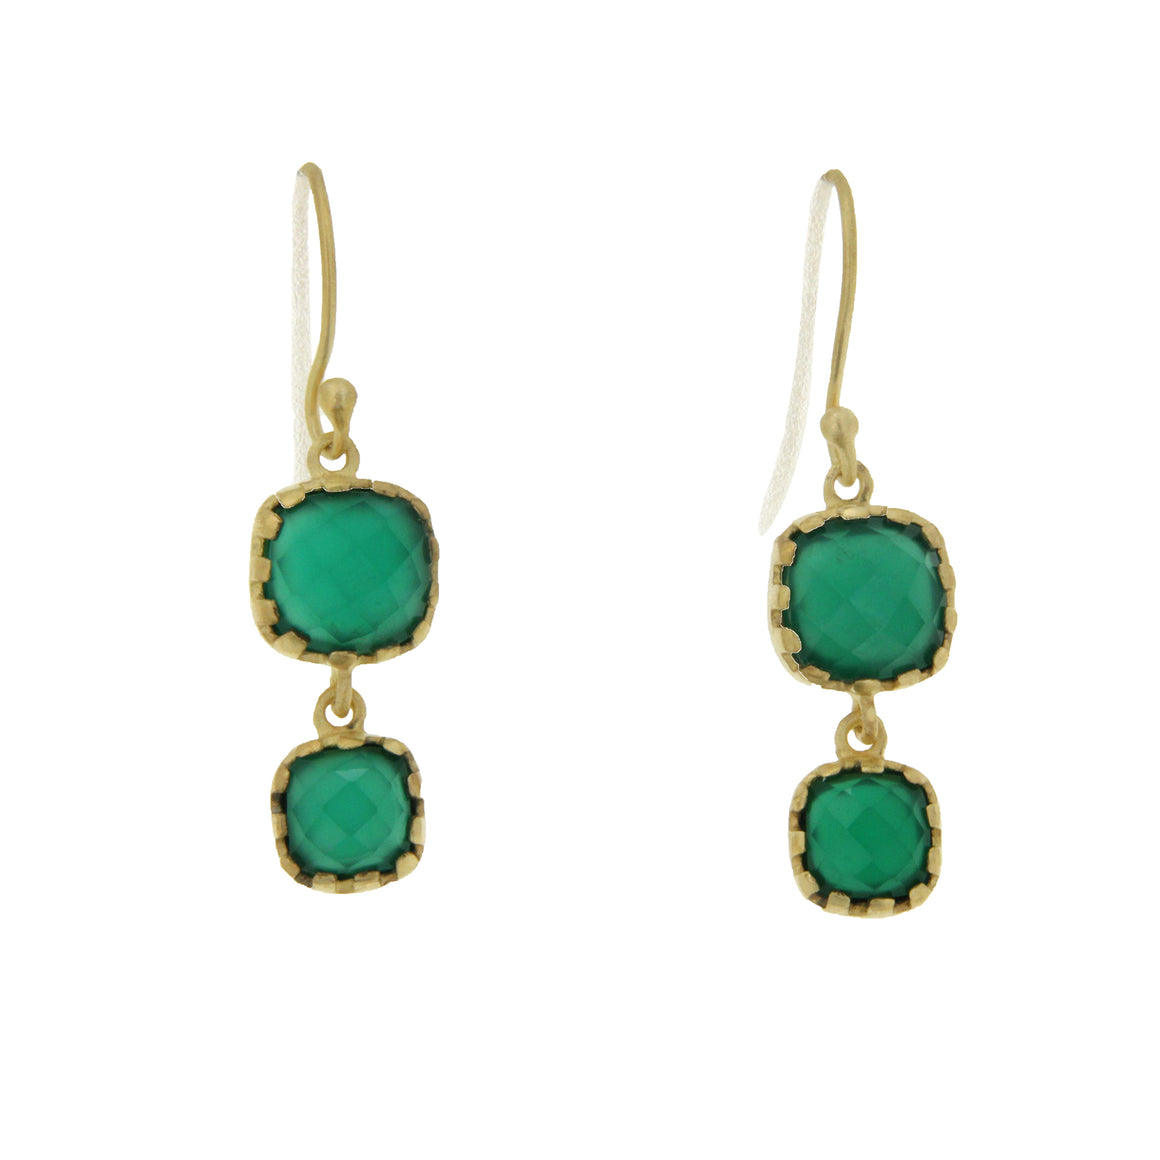 A two stone checkered cut Green Onyx on a hook. A dramatic artisan inspired dangling earring that reflects the vivid color of the stones. Set in 22 carat Vermeil over Sterling Silver.